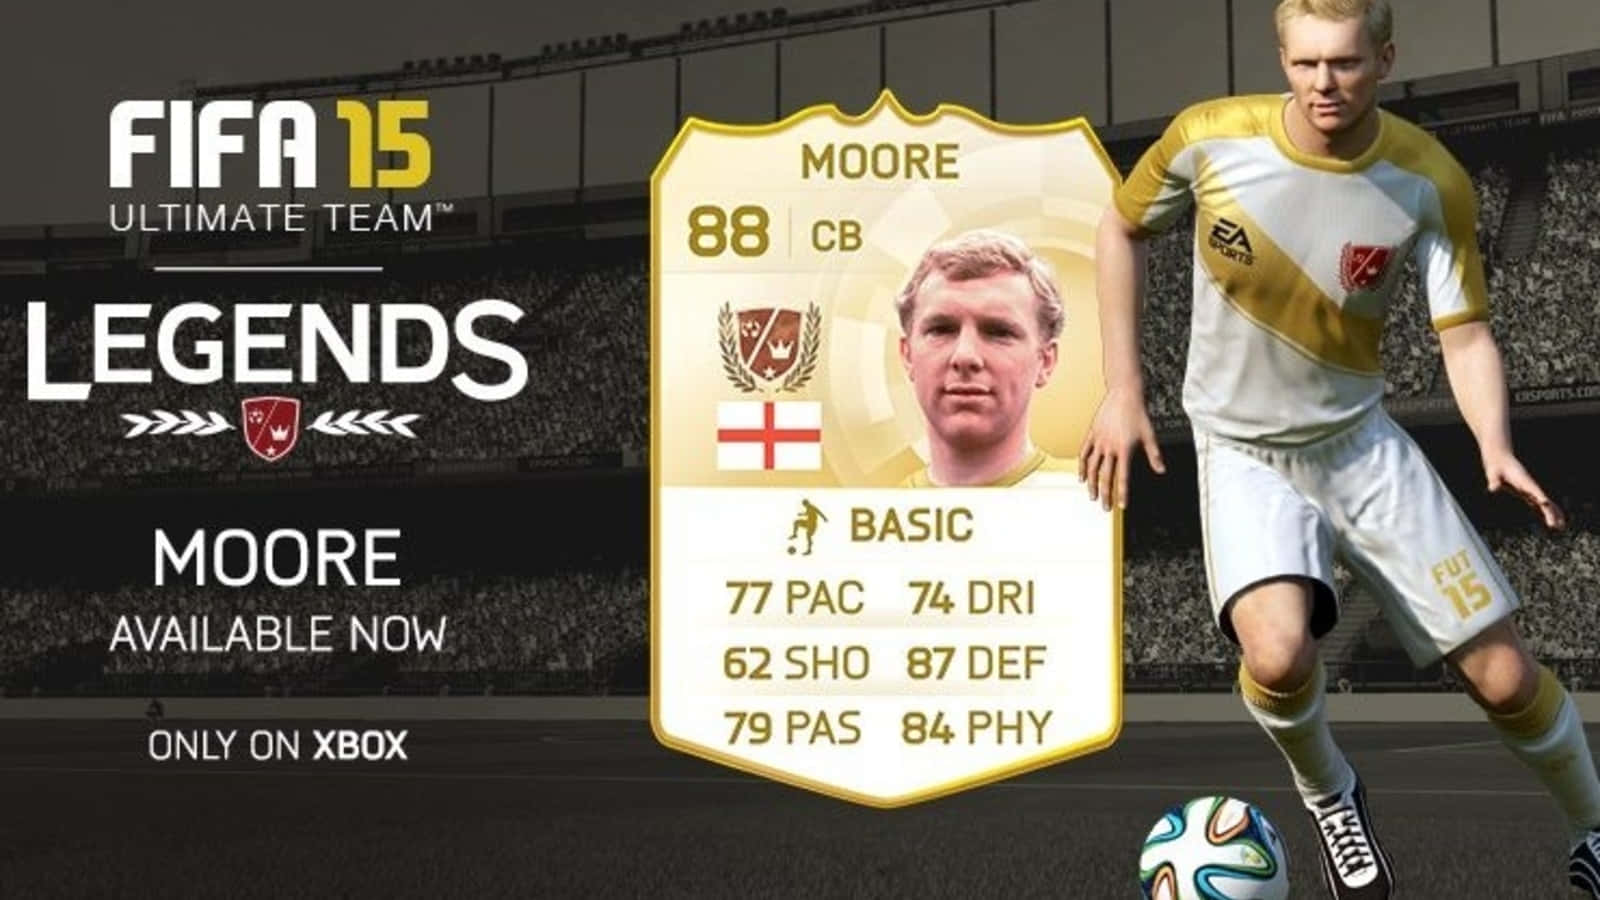 Bobby Moore in FIFA 15 Ultimate Team Legends Wallpaper